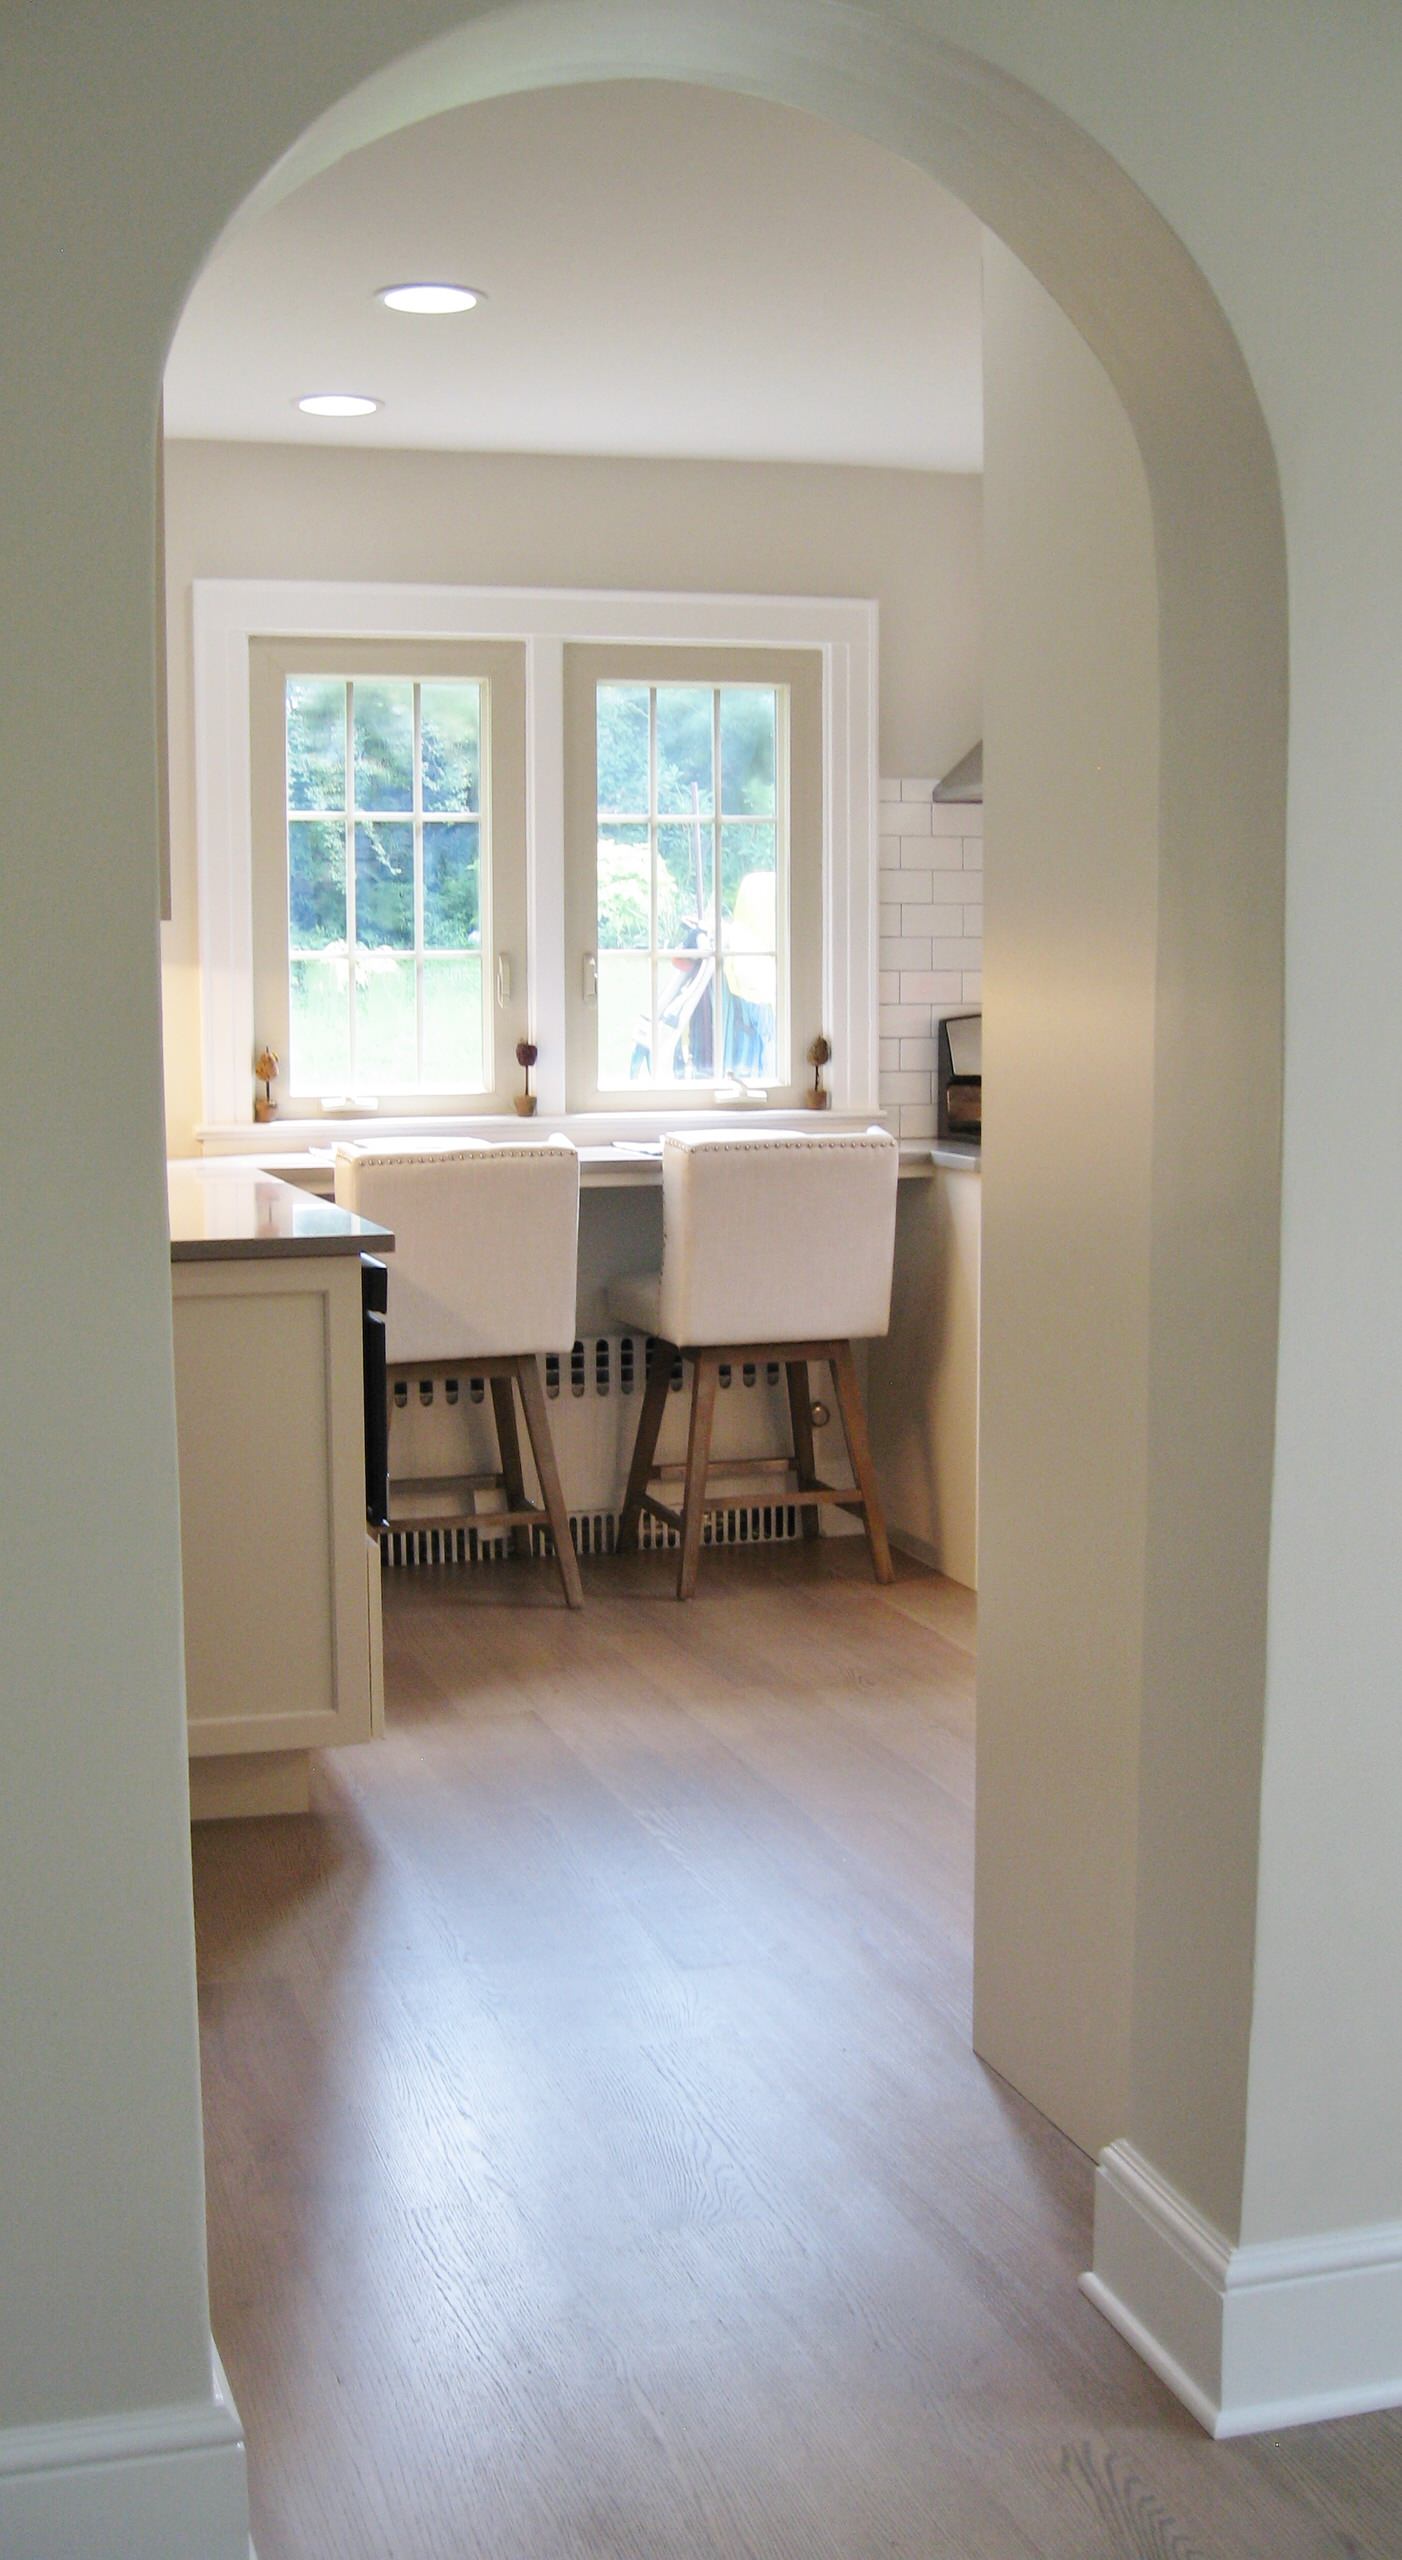 Hastings Kitchen Makeover